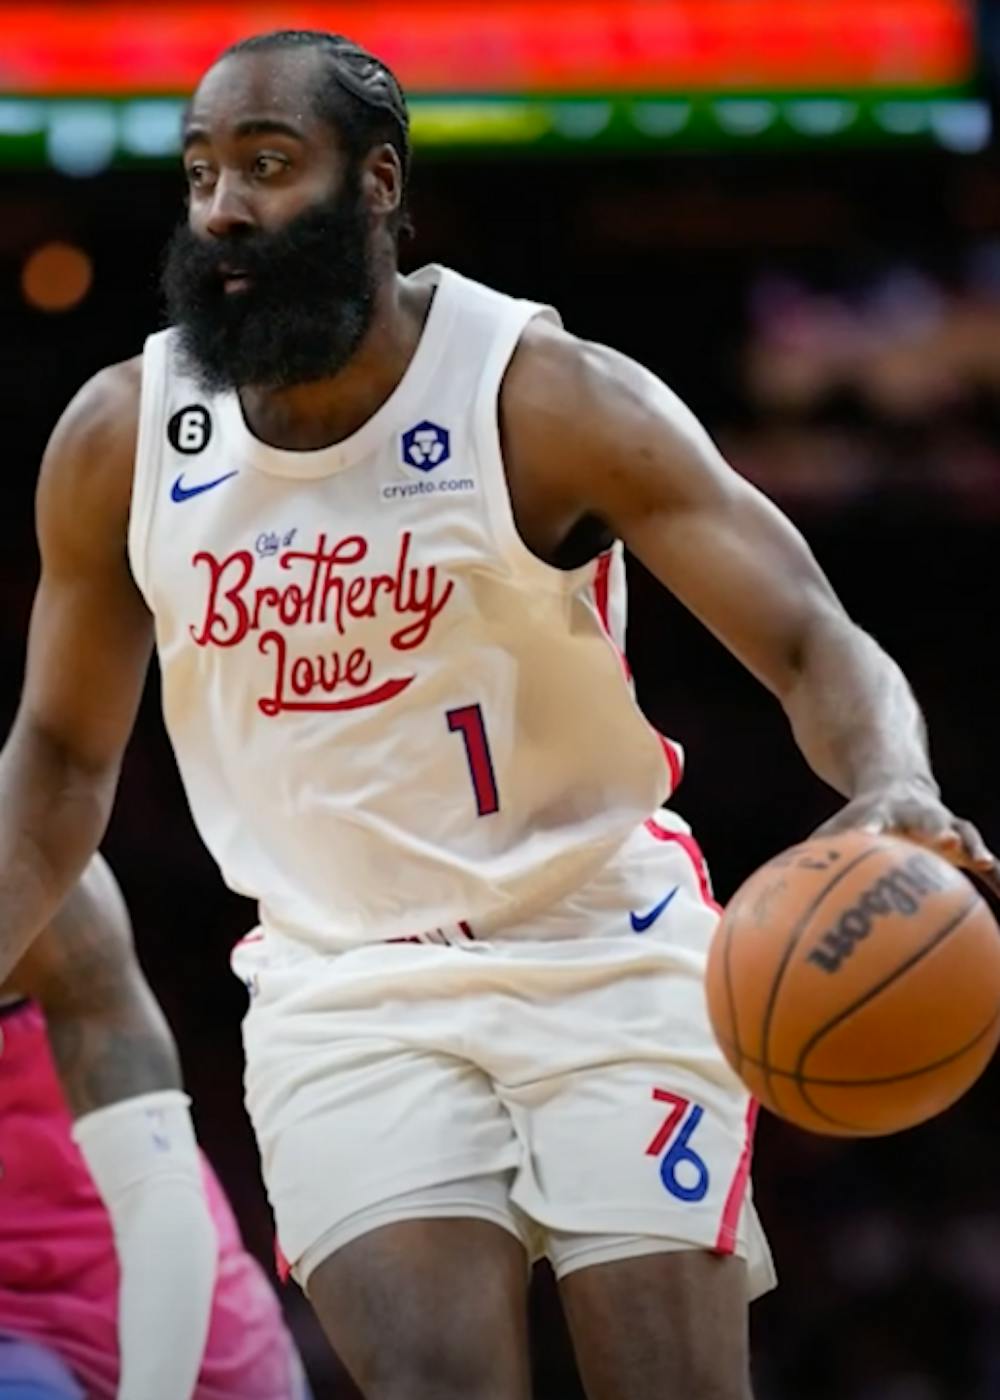 <p>76ers star guard James Harden has been traded to the Clippers (Photo courtesy of FanDuel / <a href="https://openverse.org/image/cc48c269-f260-4b84-8feb-1df8cab28b7c?q=james%20harden" target="">Wikipedia Commons</a>).</p>